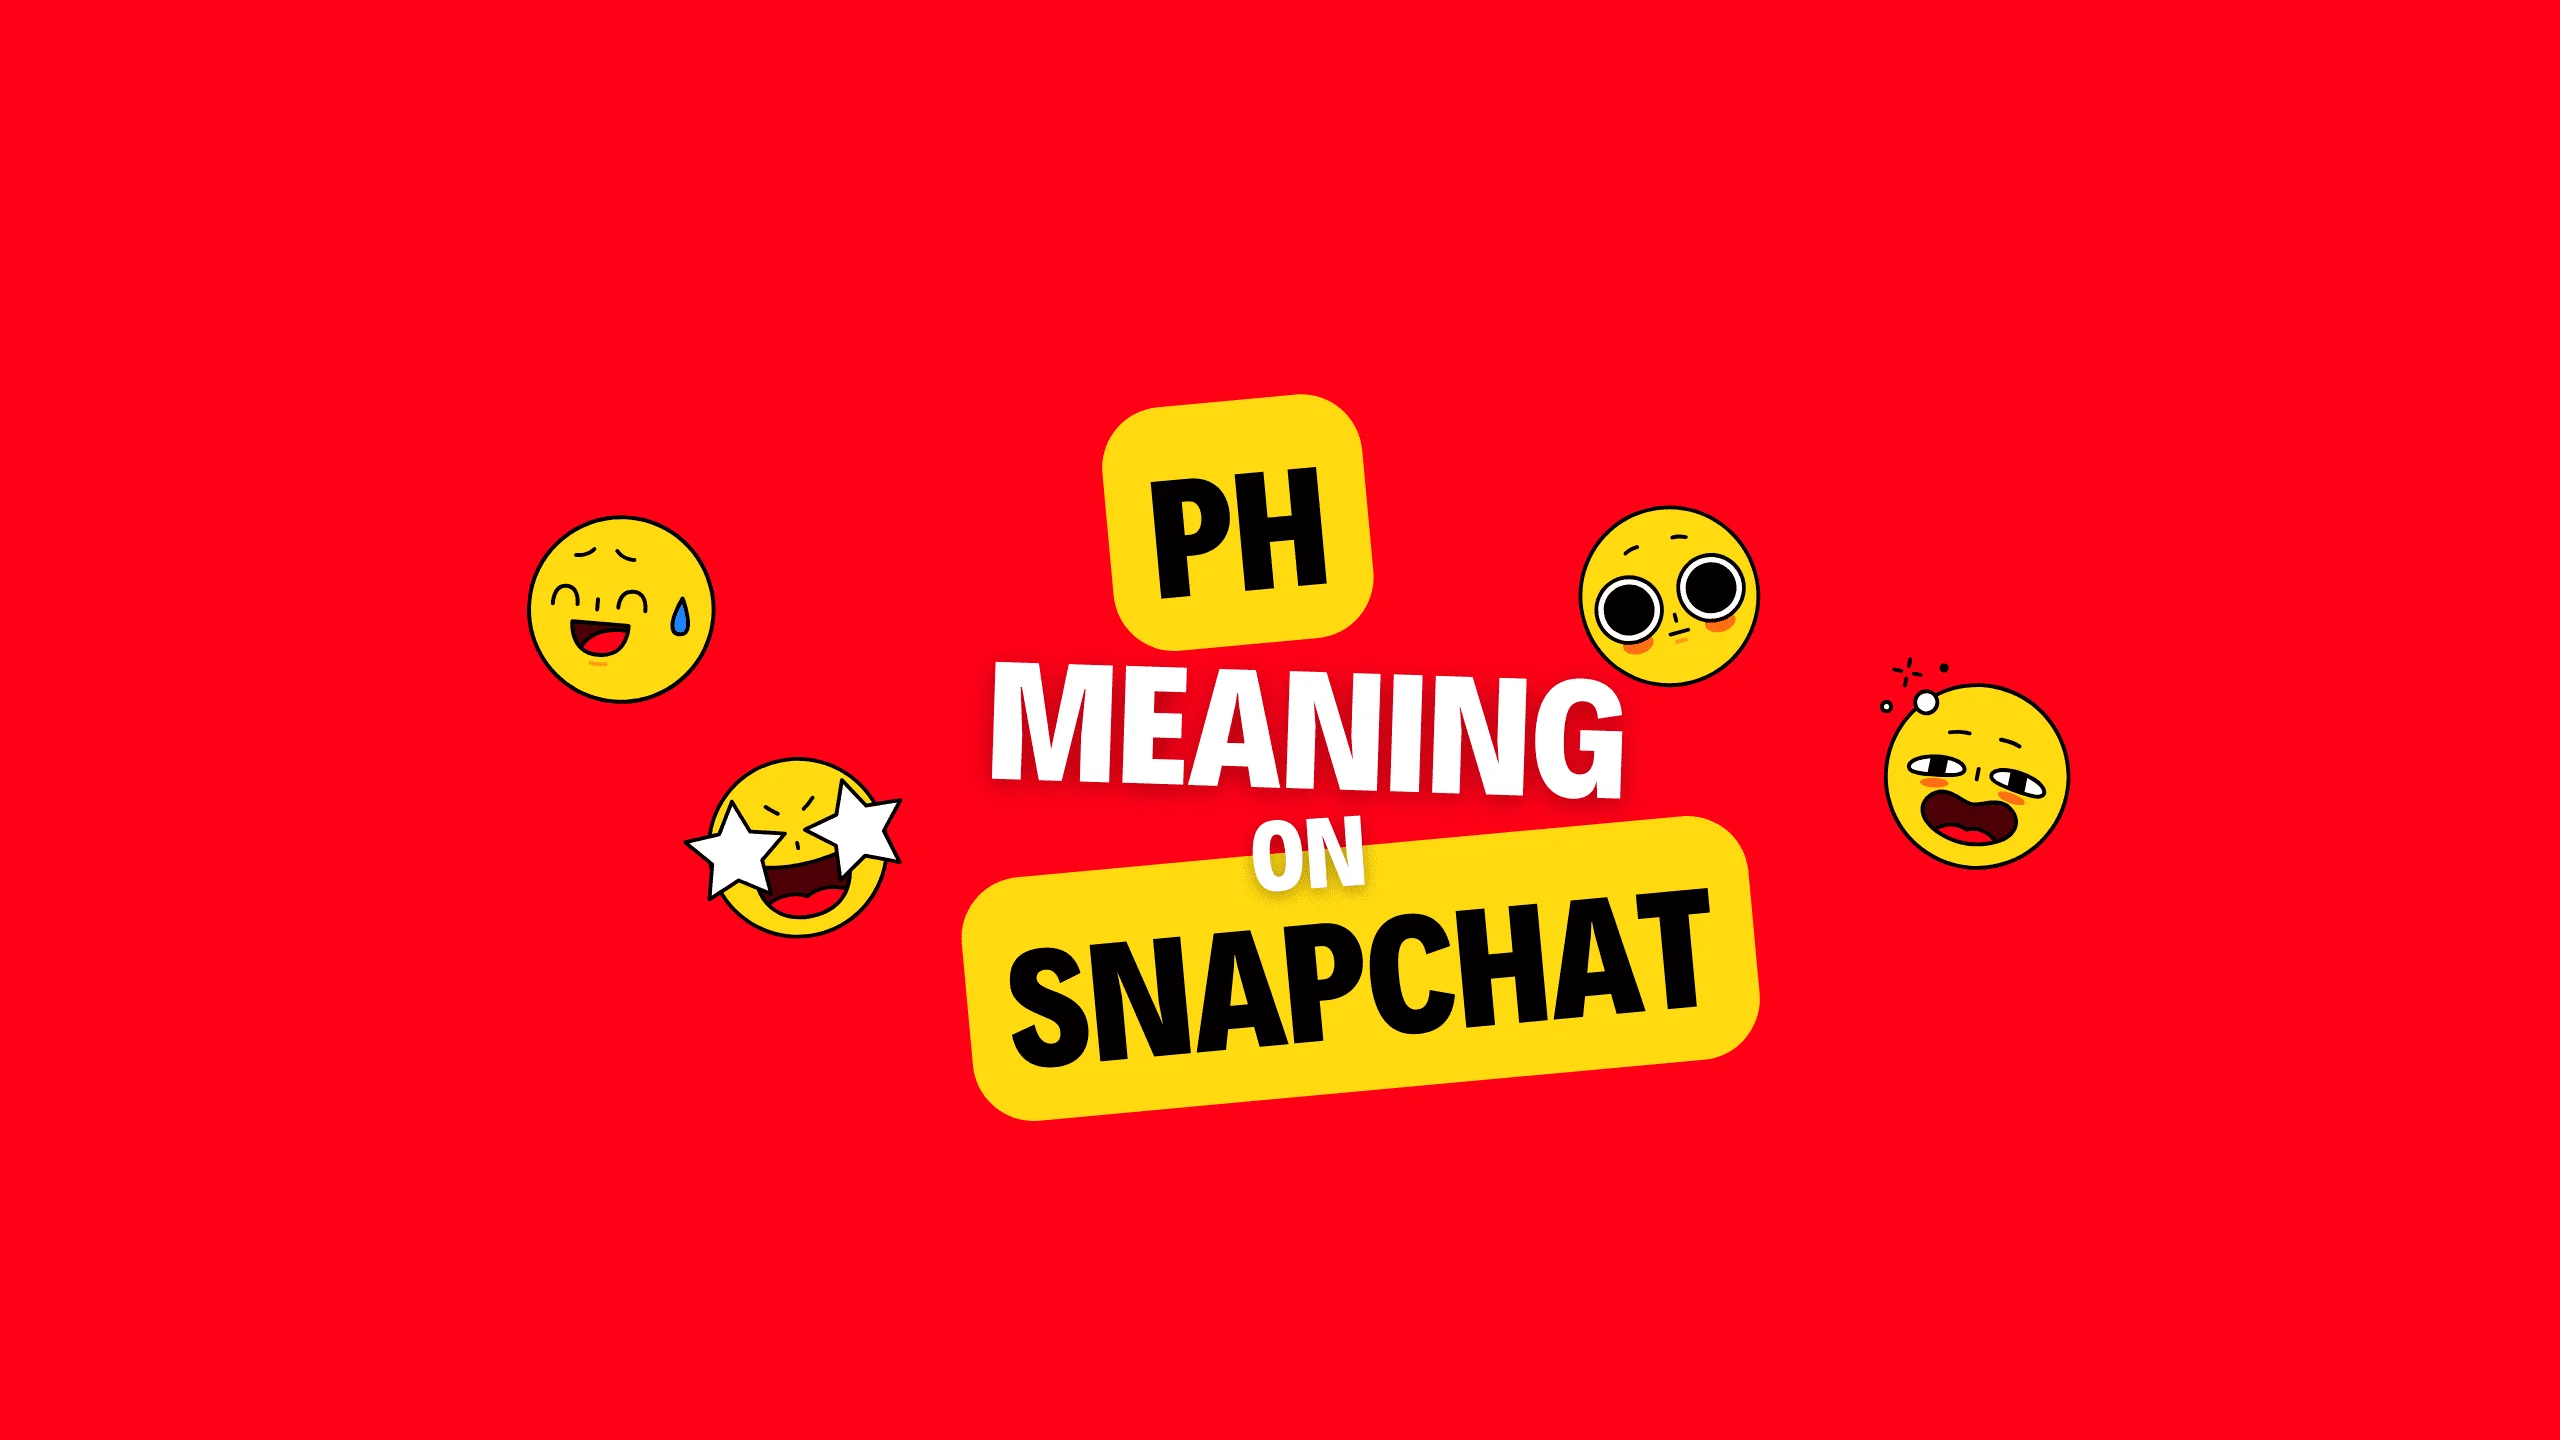 What does PH mean on Snapchat